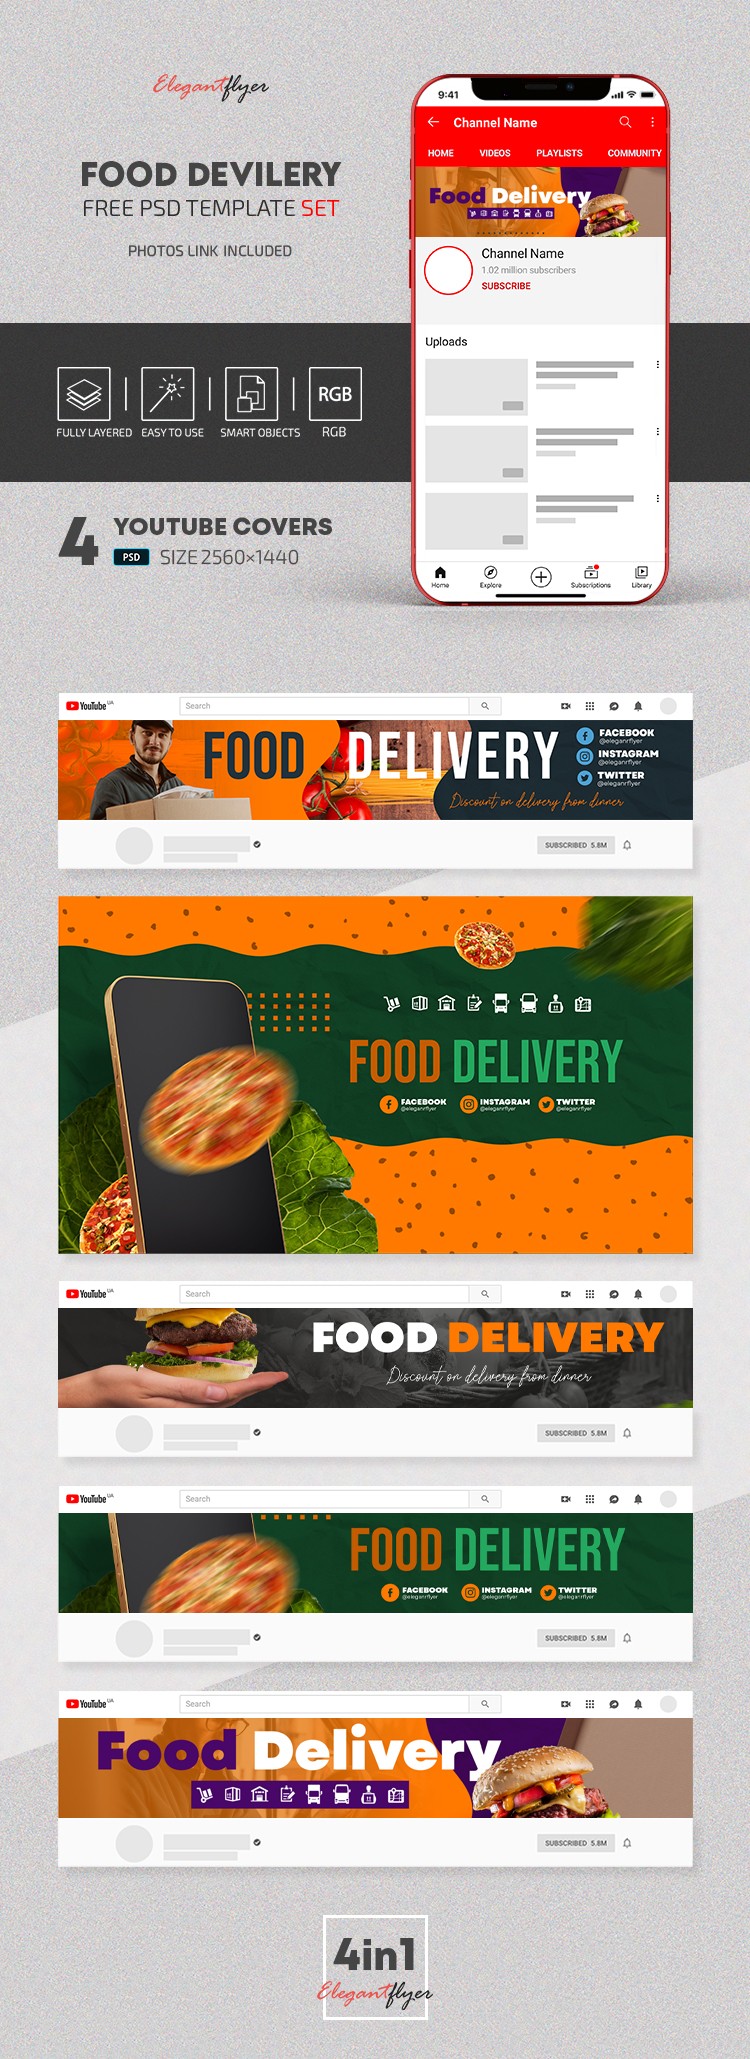 Food Delivery Youtube by ElegantFlyer